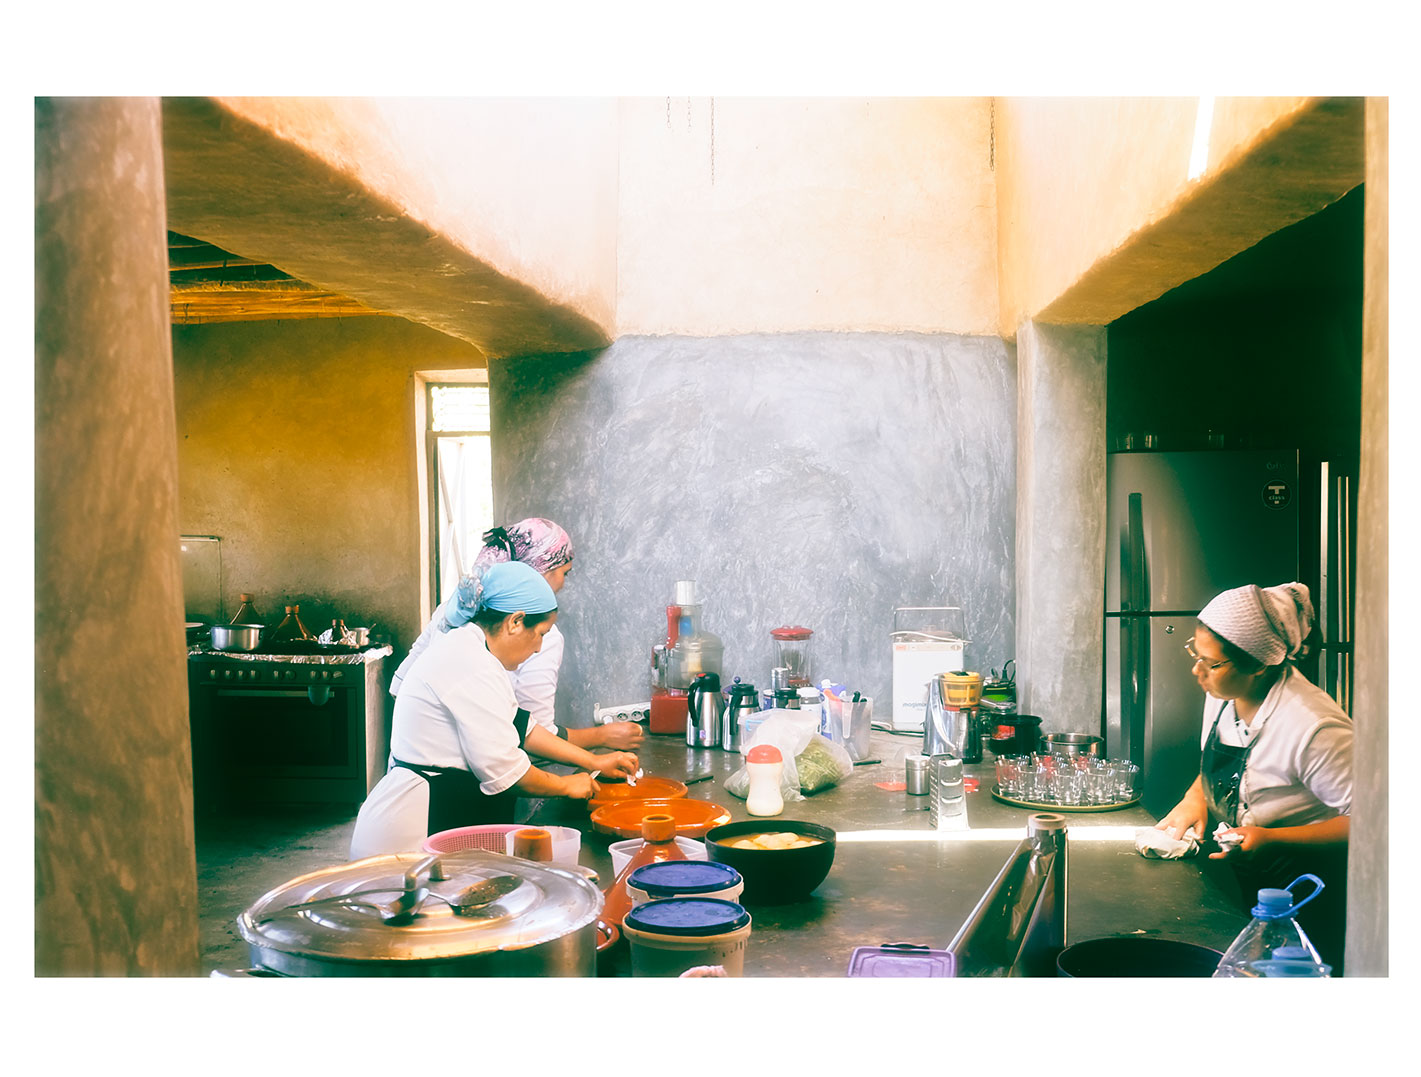 Kitchen staff making genuine Moroccan dishes for guests at a Marrakesh luxury desert camp – La Pause Morocco.